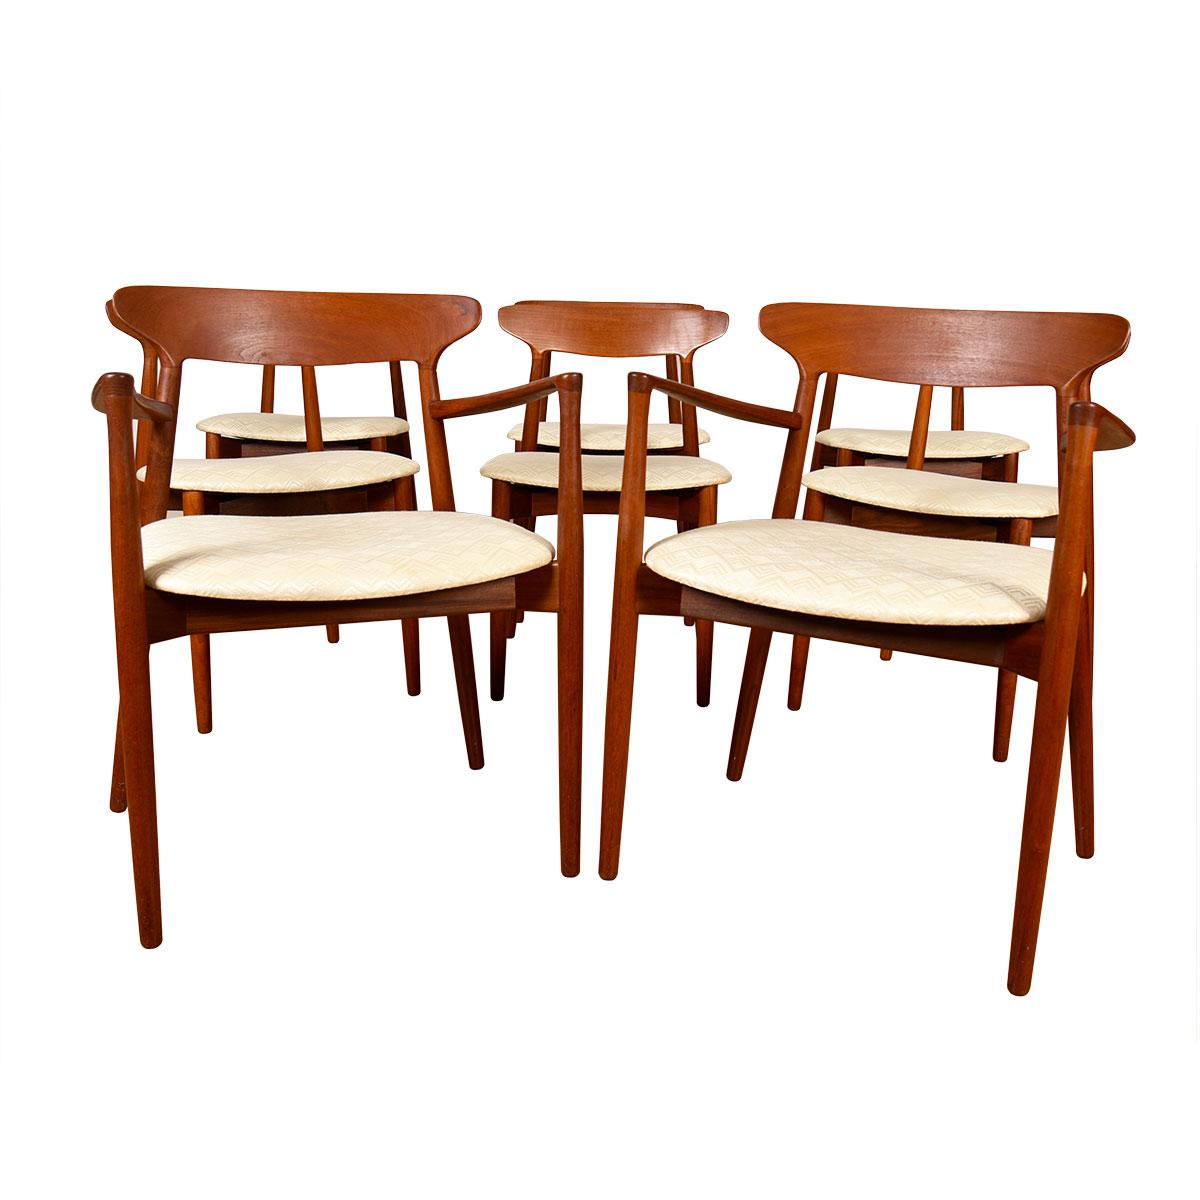 Solid teak sculpted backrests define these chairs — in stunning vintage condition.
Designed by Harry Ostergaard, the iconic mid century designer and one of the leaders  of the Danish Modern furniture movement.
Set includes the 2 hard to come by arm